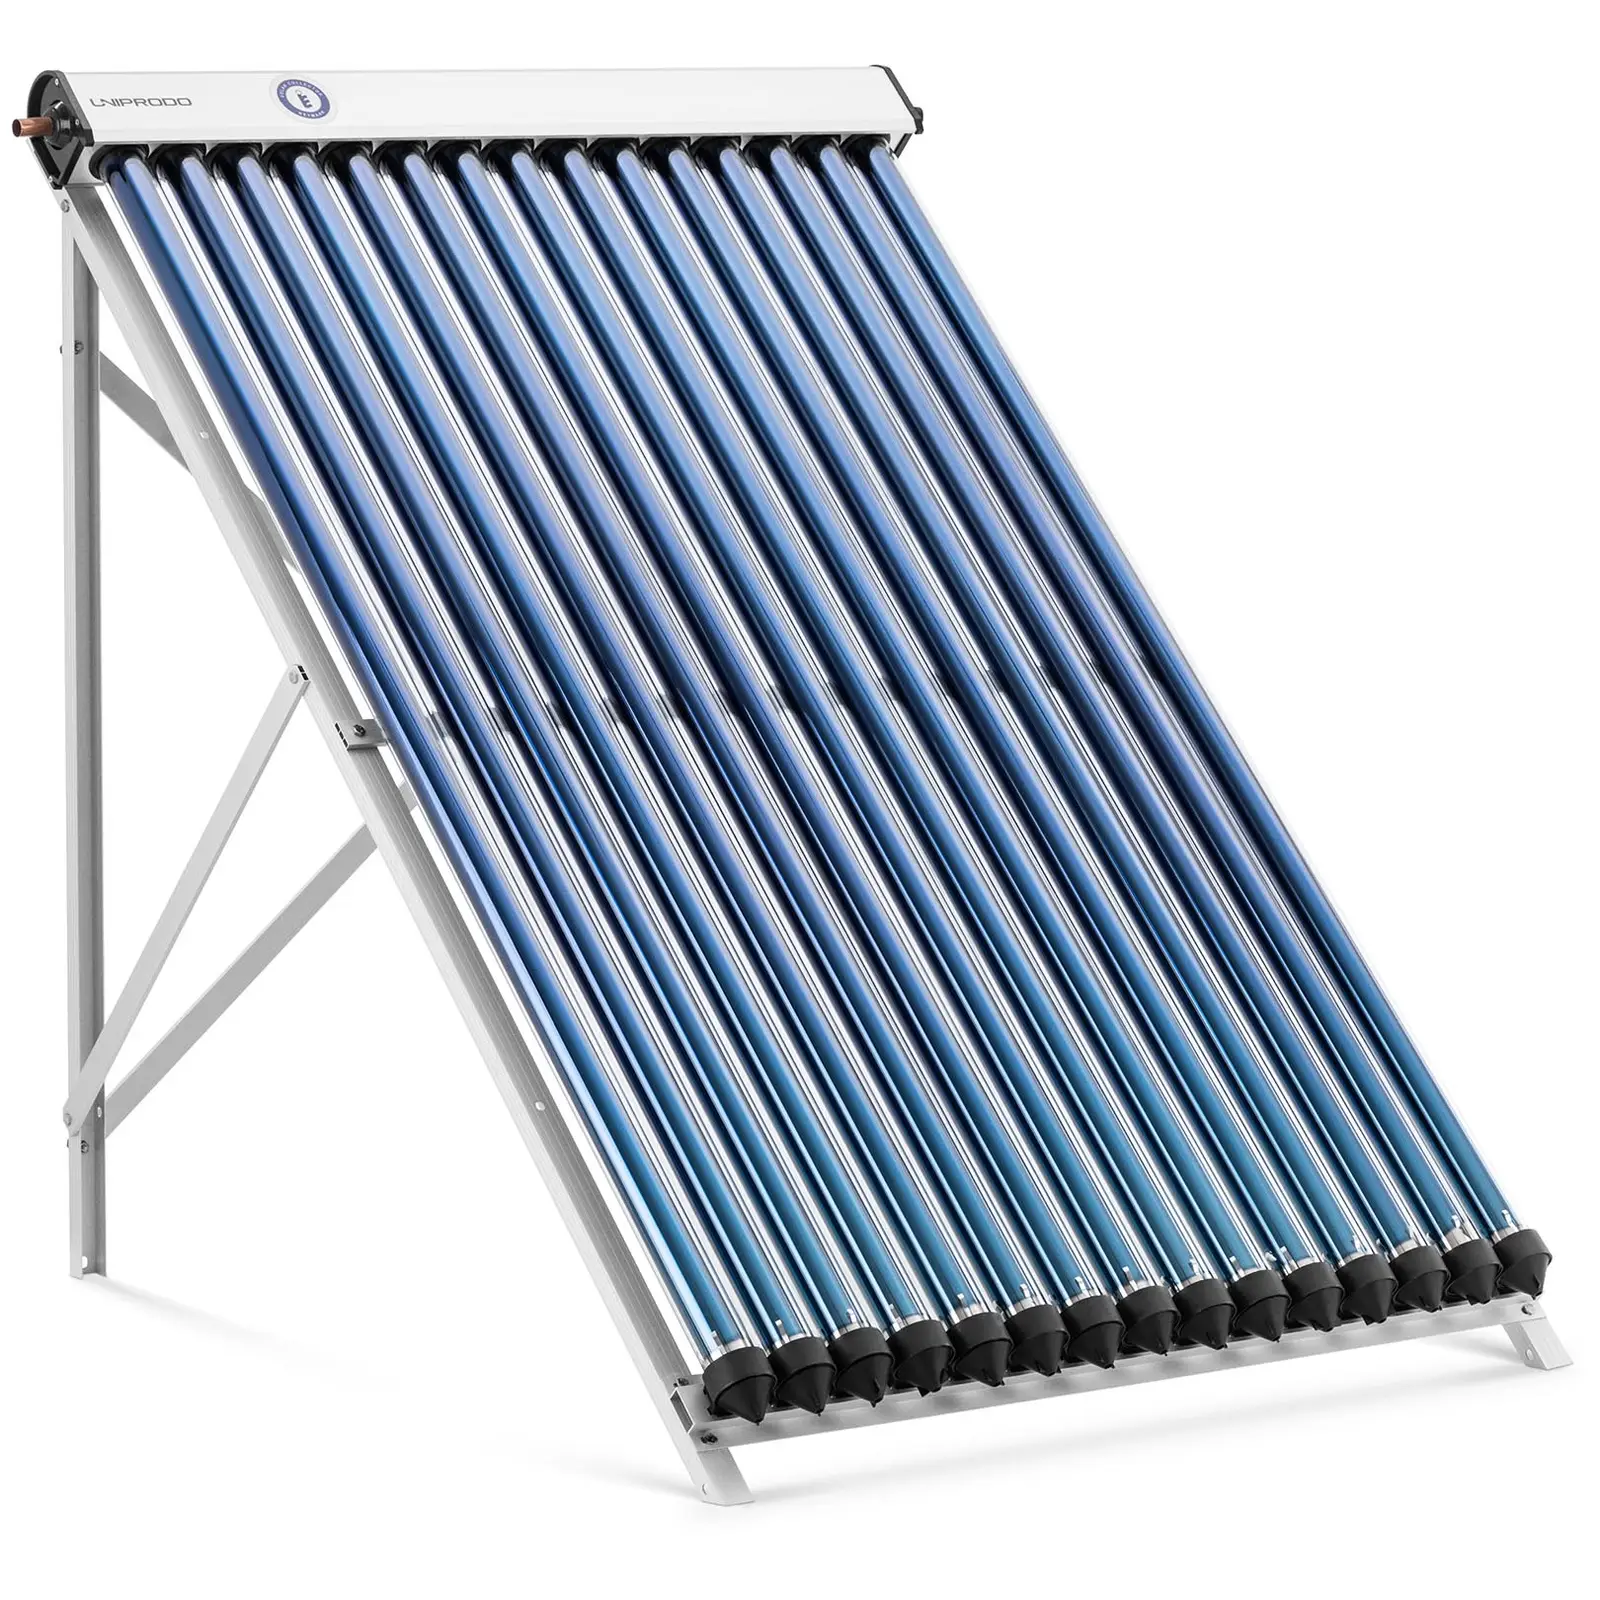 Tube collector - Solar thermal - 15 Tubes - 120 - 150 L - 1.2 m² - -45 - 90 °C